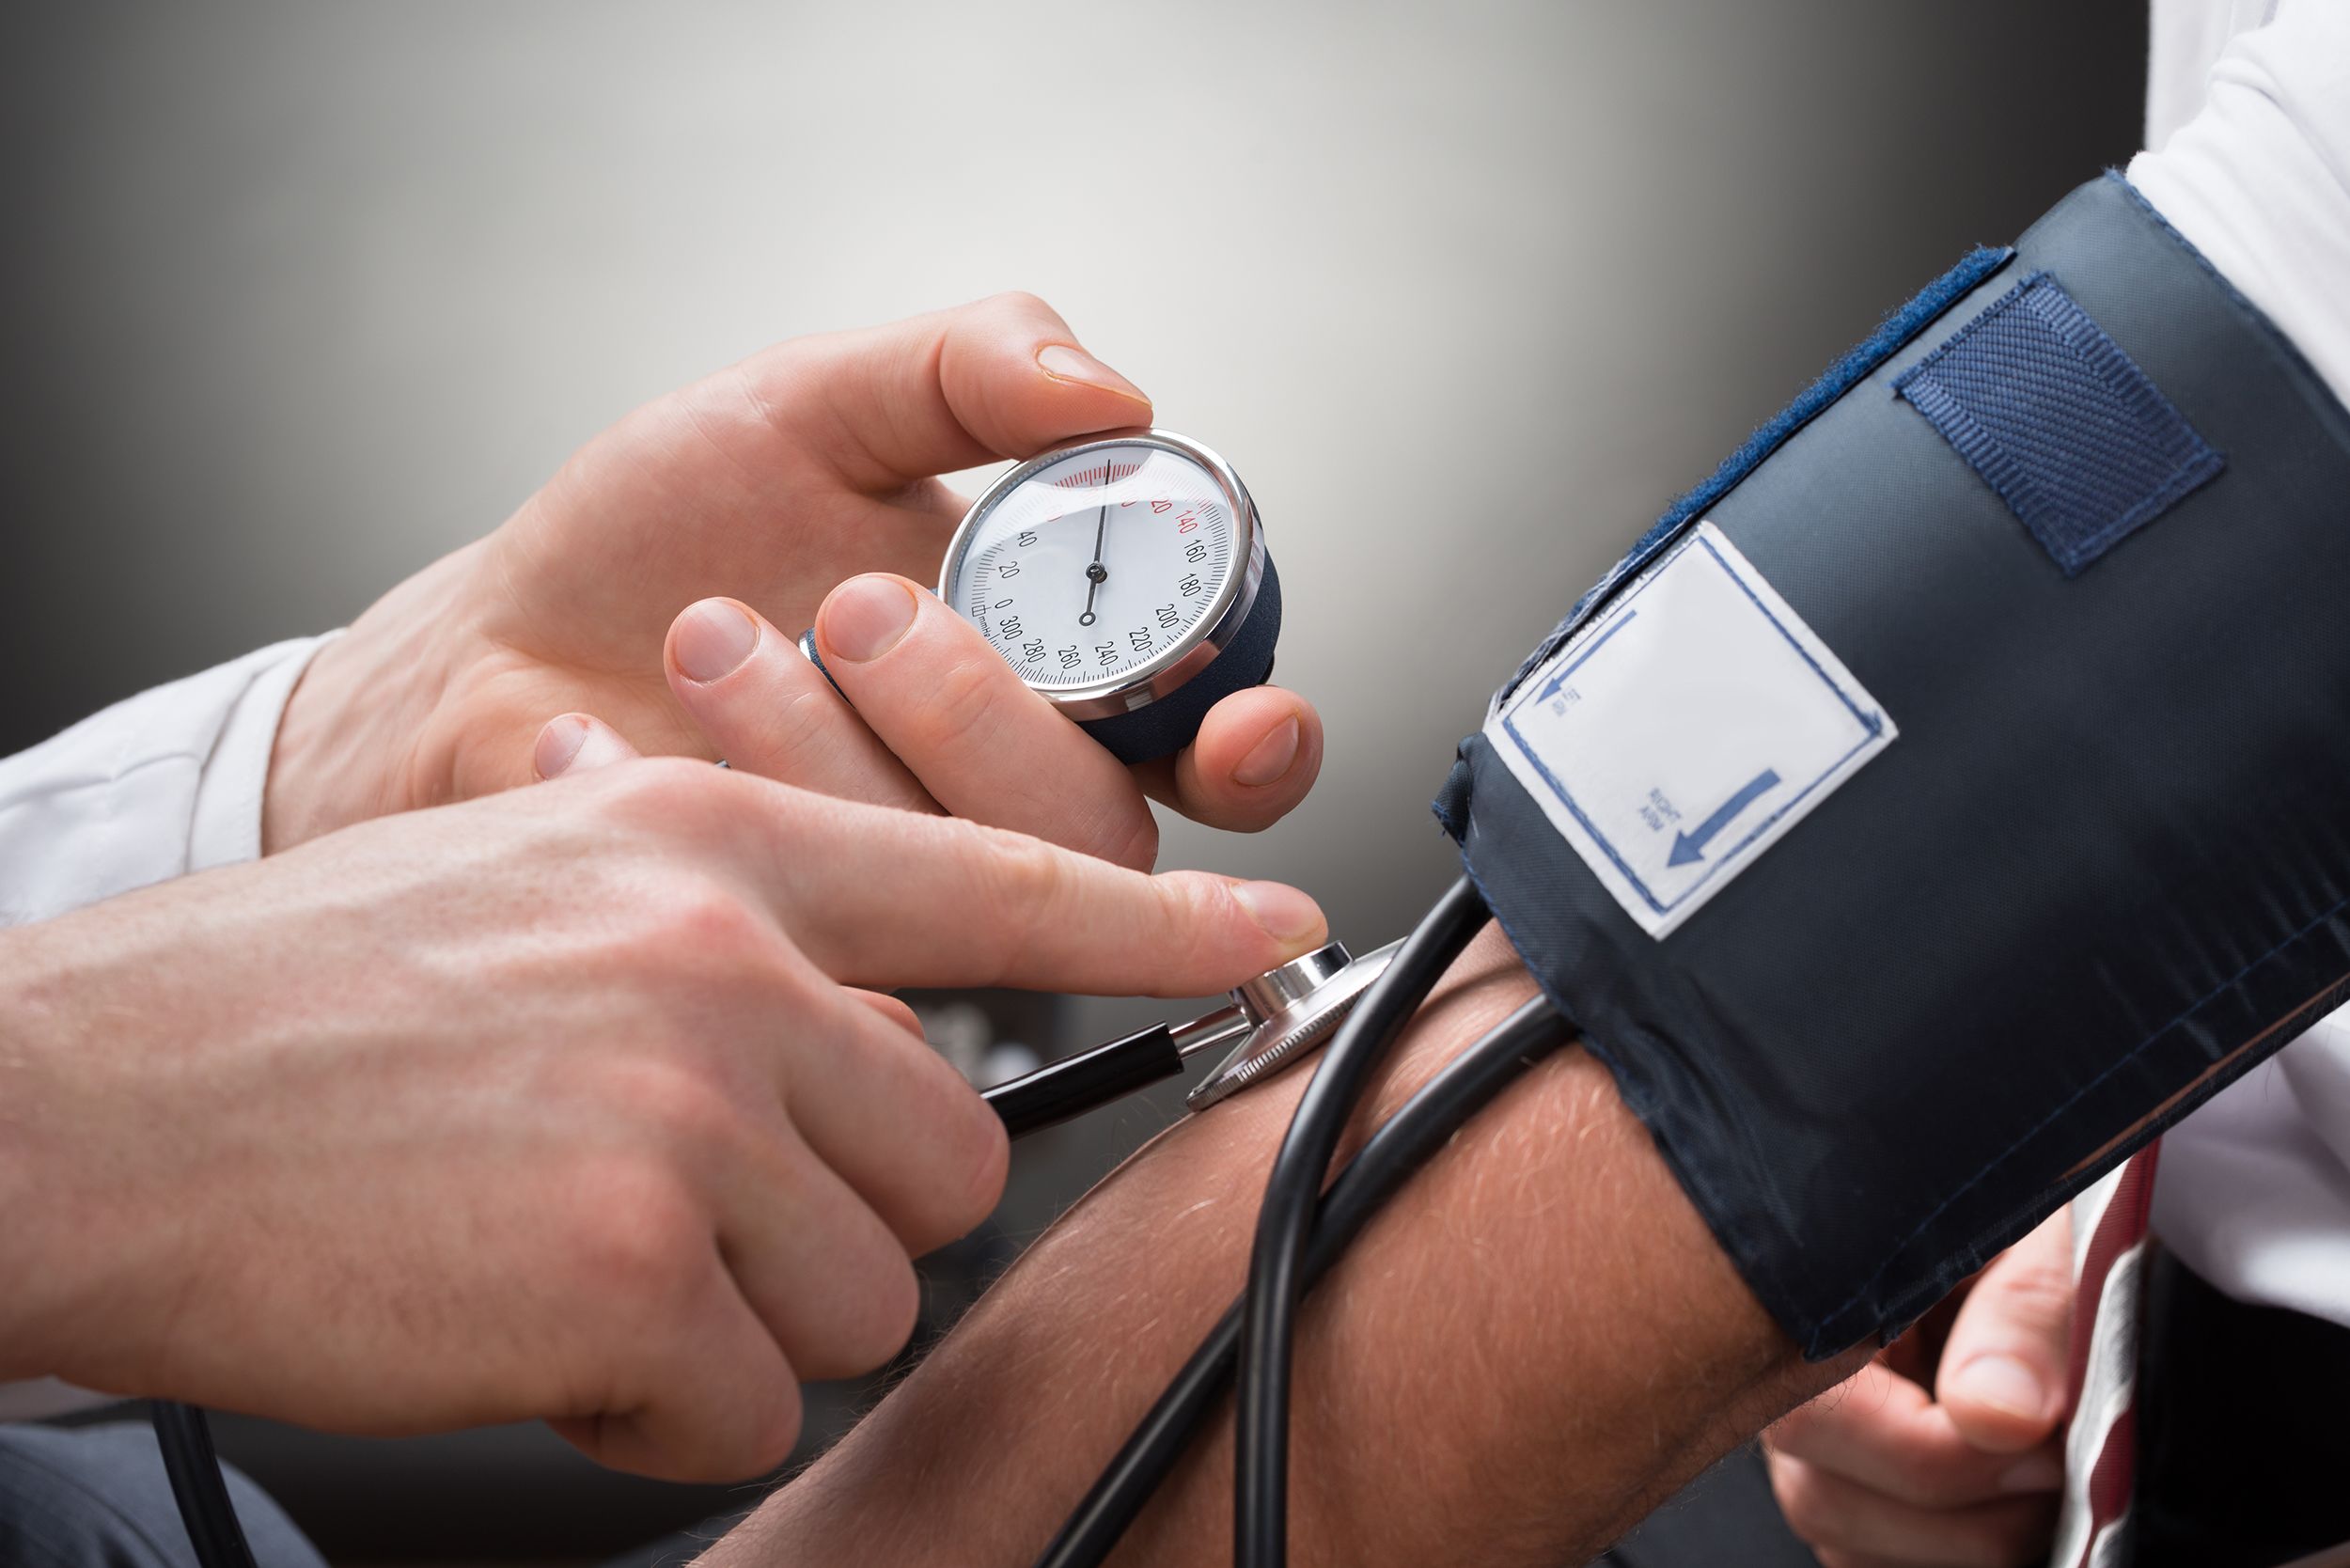 Most Americans need a large or extra-large blood pressure cuff